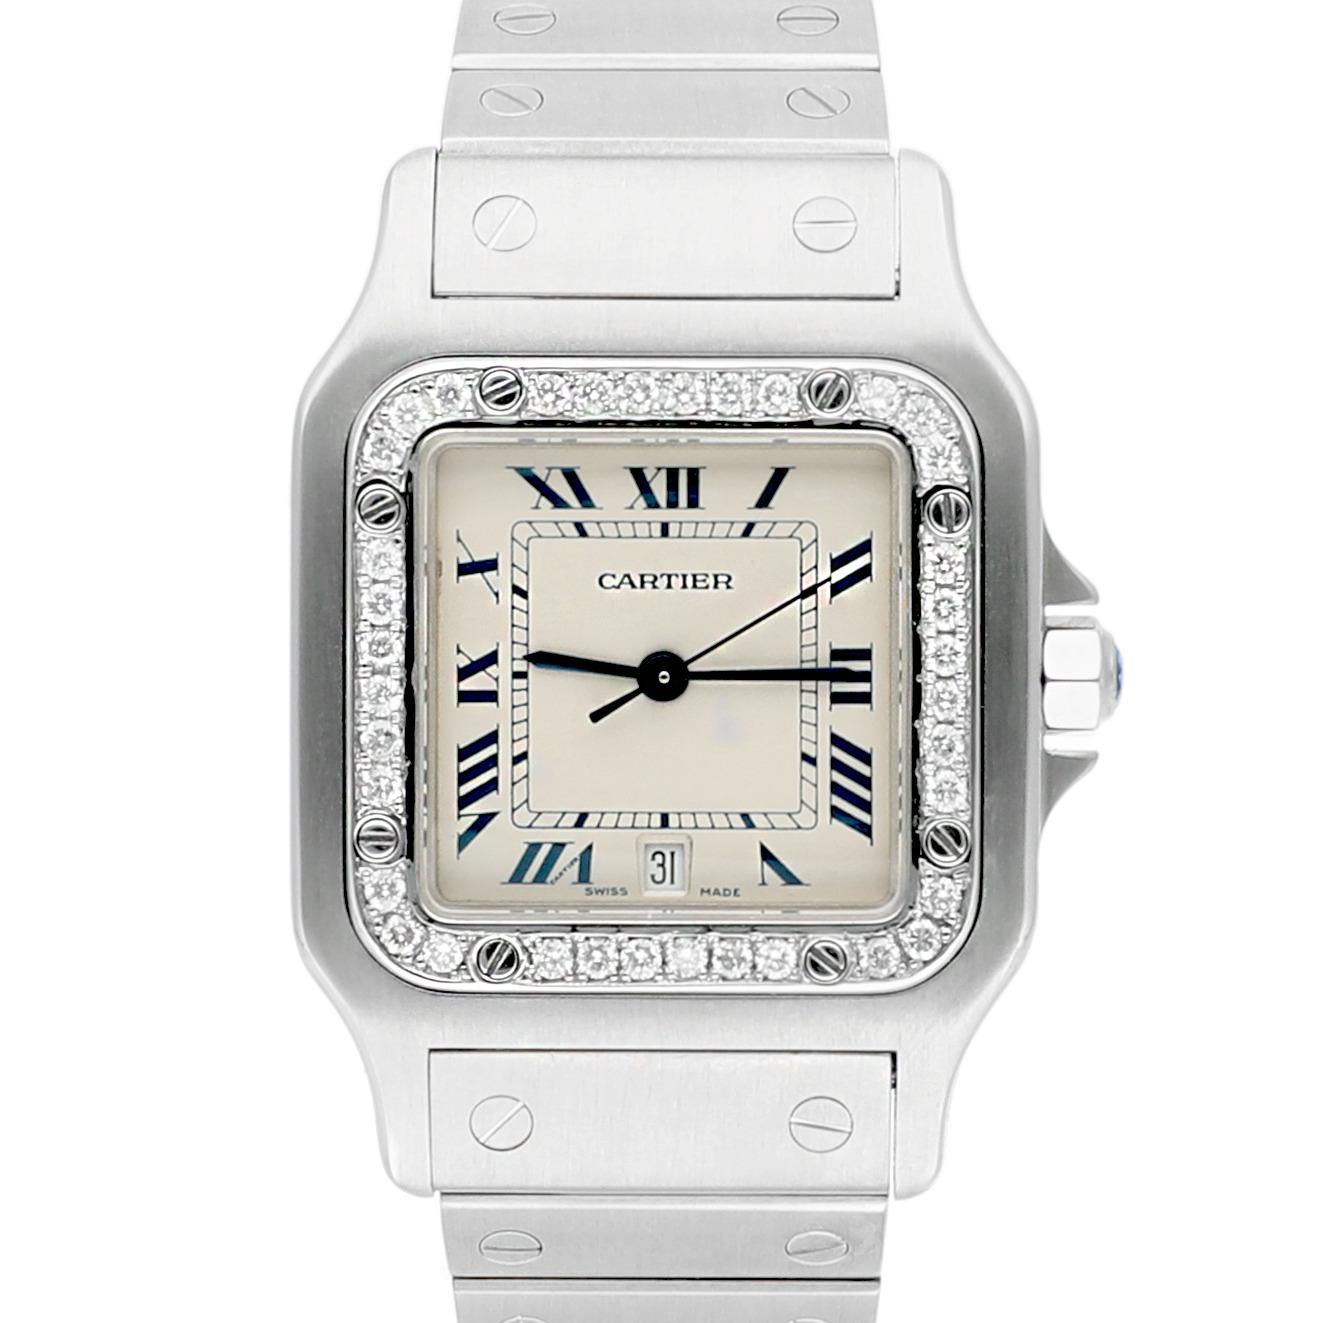 Cartier Santos Galbee 29 mm Women's Watch Stainless Steel with Diamond Bezel 1564
This watch has been professionally polished, serviced and is in excellent overall condition. There are absolutely no visible scratches or blemishes. Diamonds were